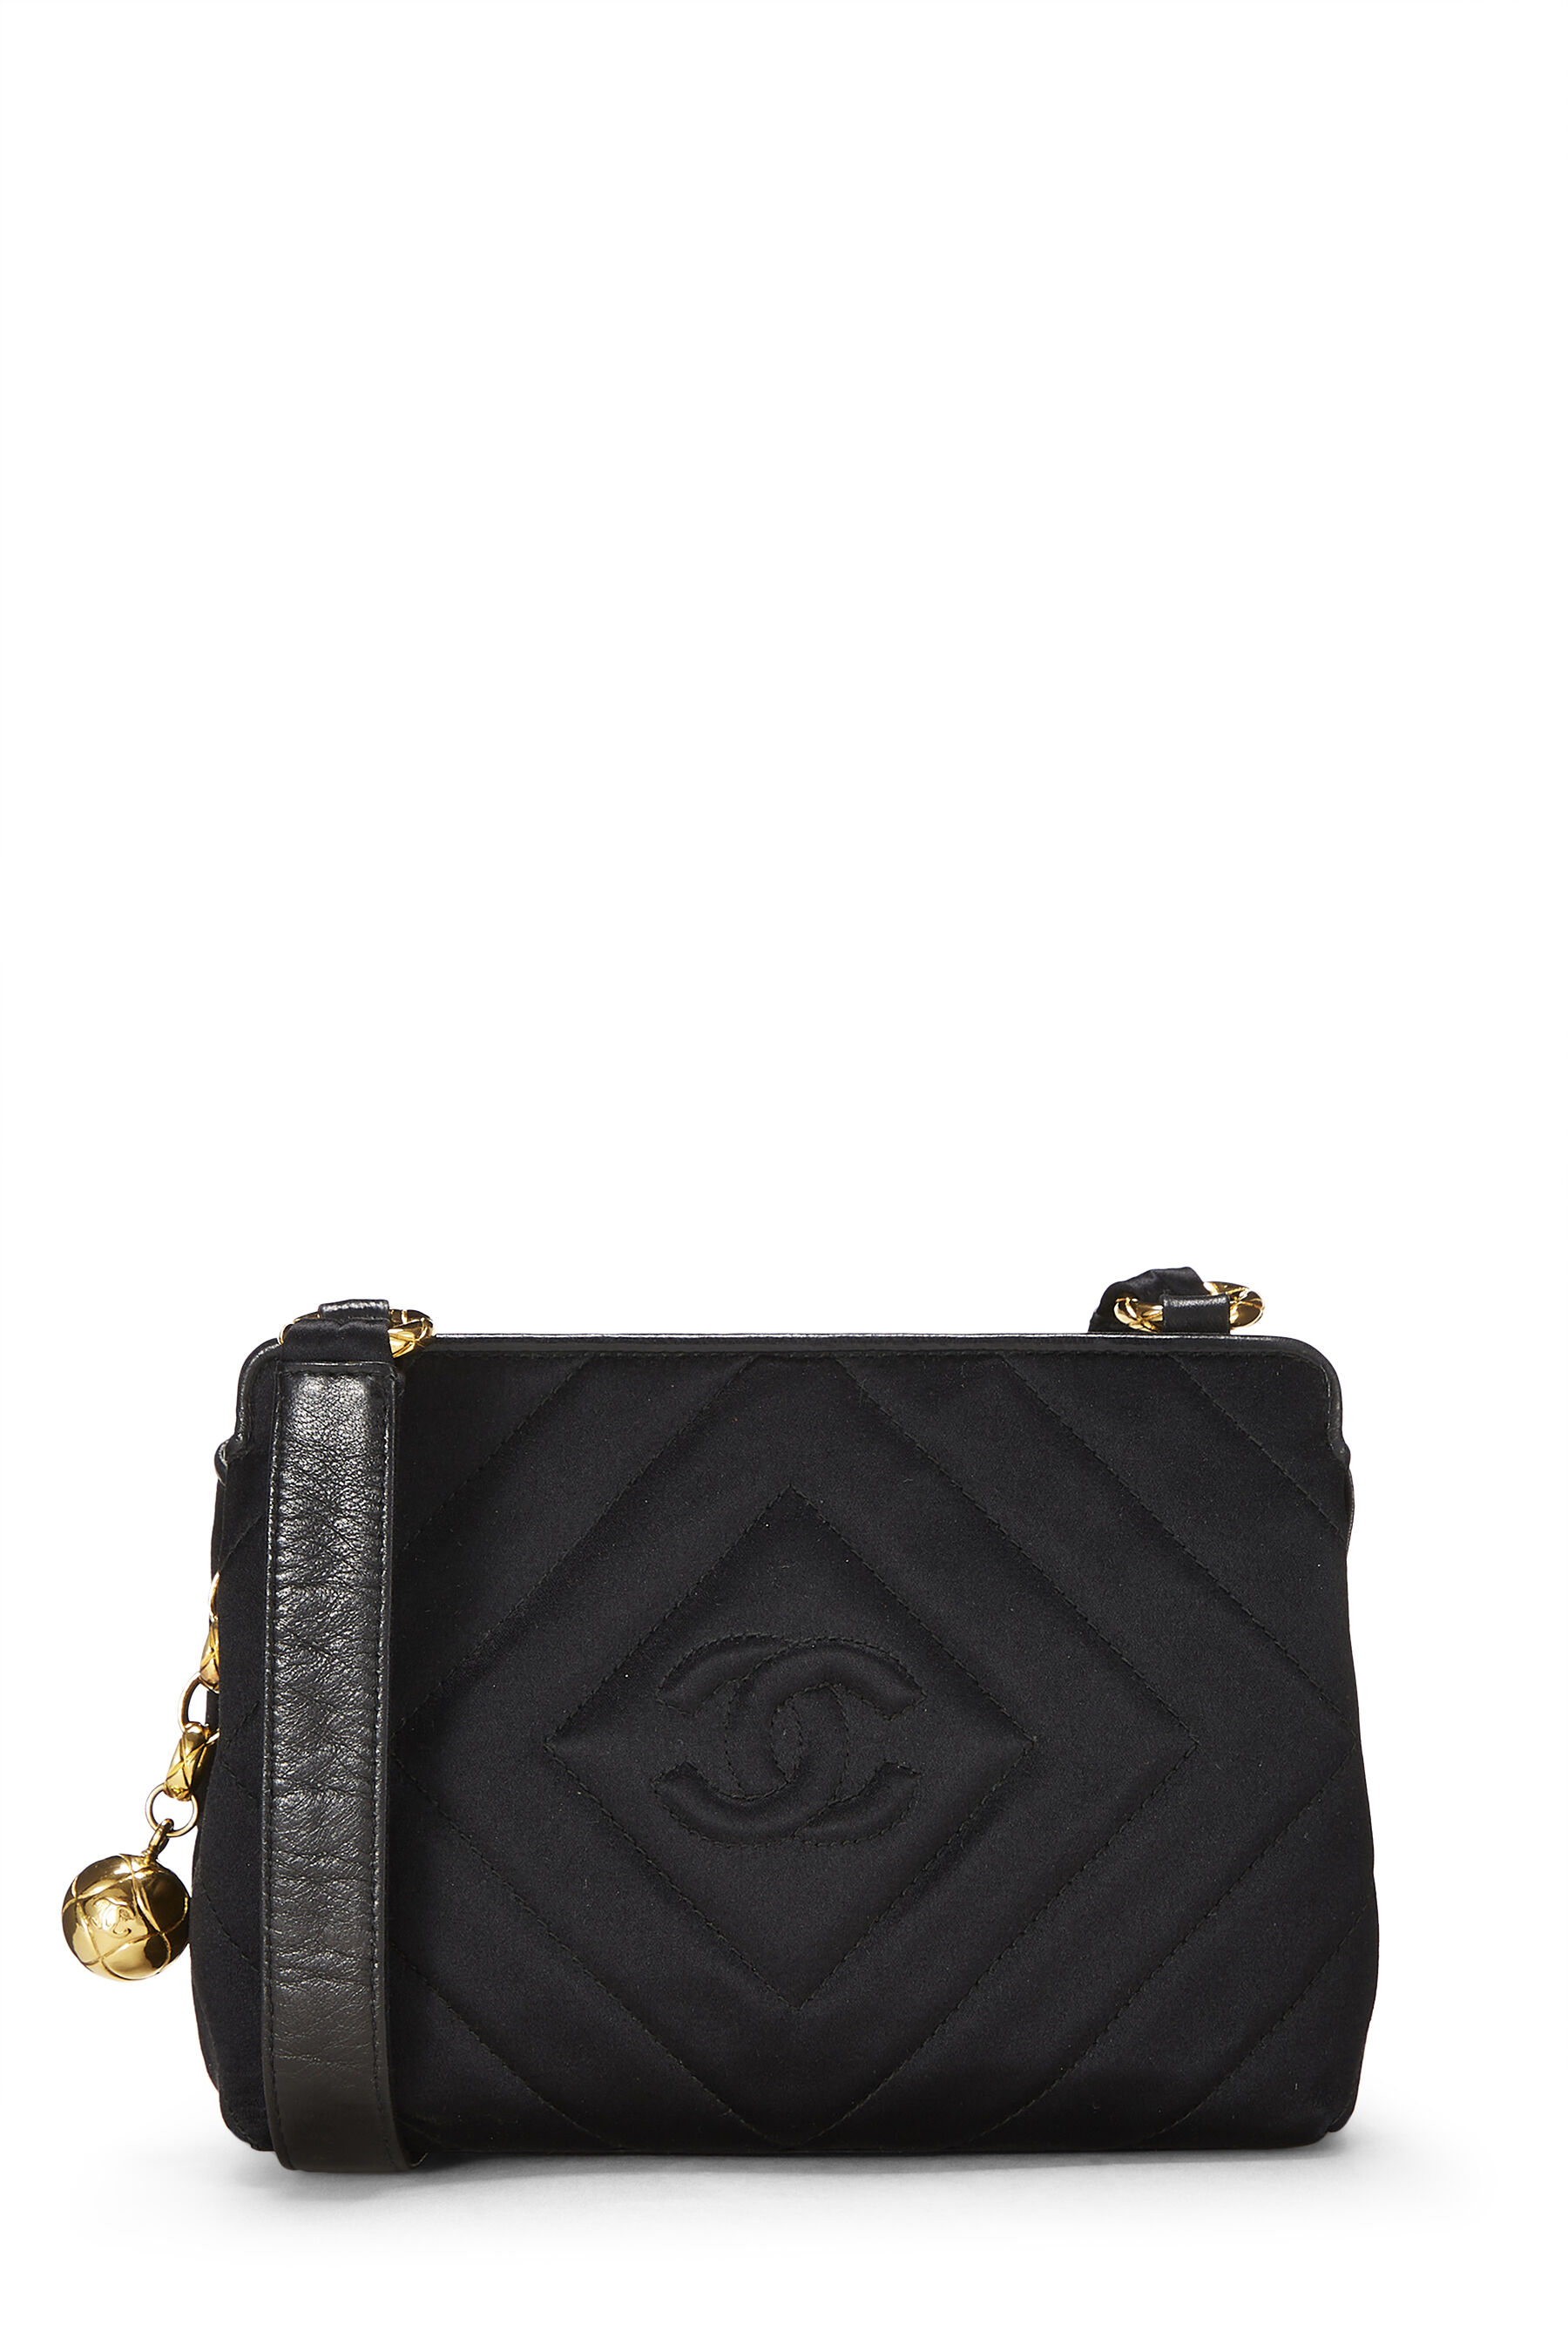 Chanel Black Quilted Satin Crossbody